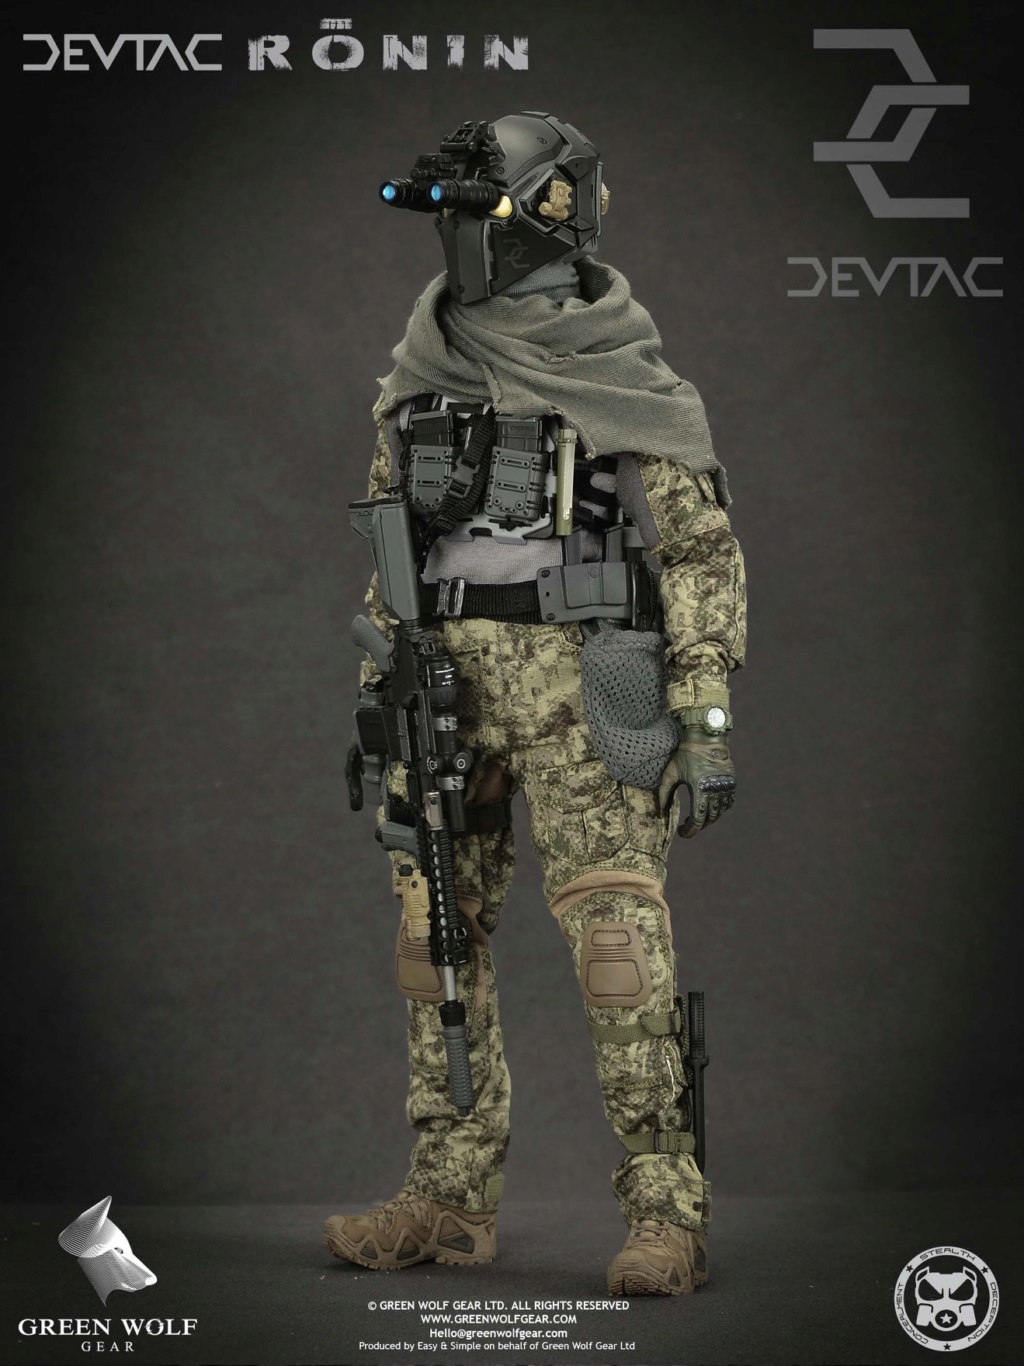 NEW PRODUCT: Green Wolf Gear DEVTAC Ronin 1/6 Action Figure (VS2434P) 262